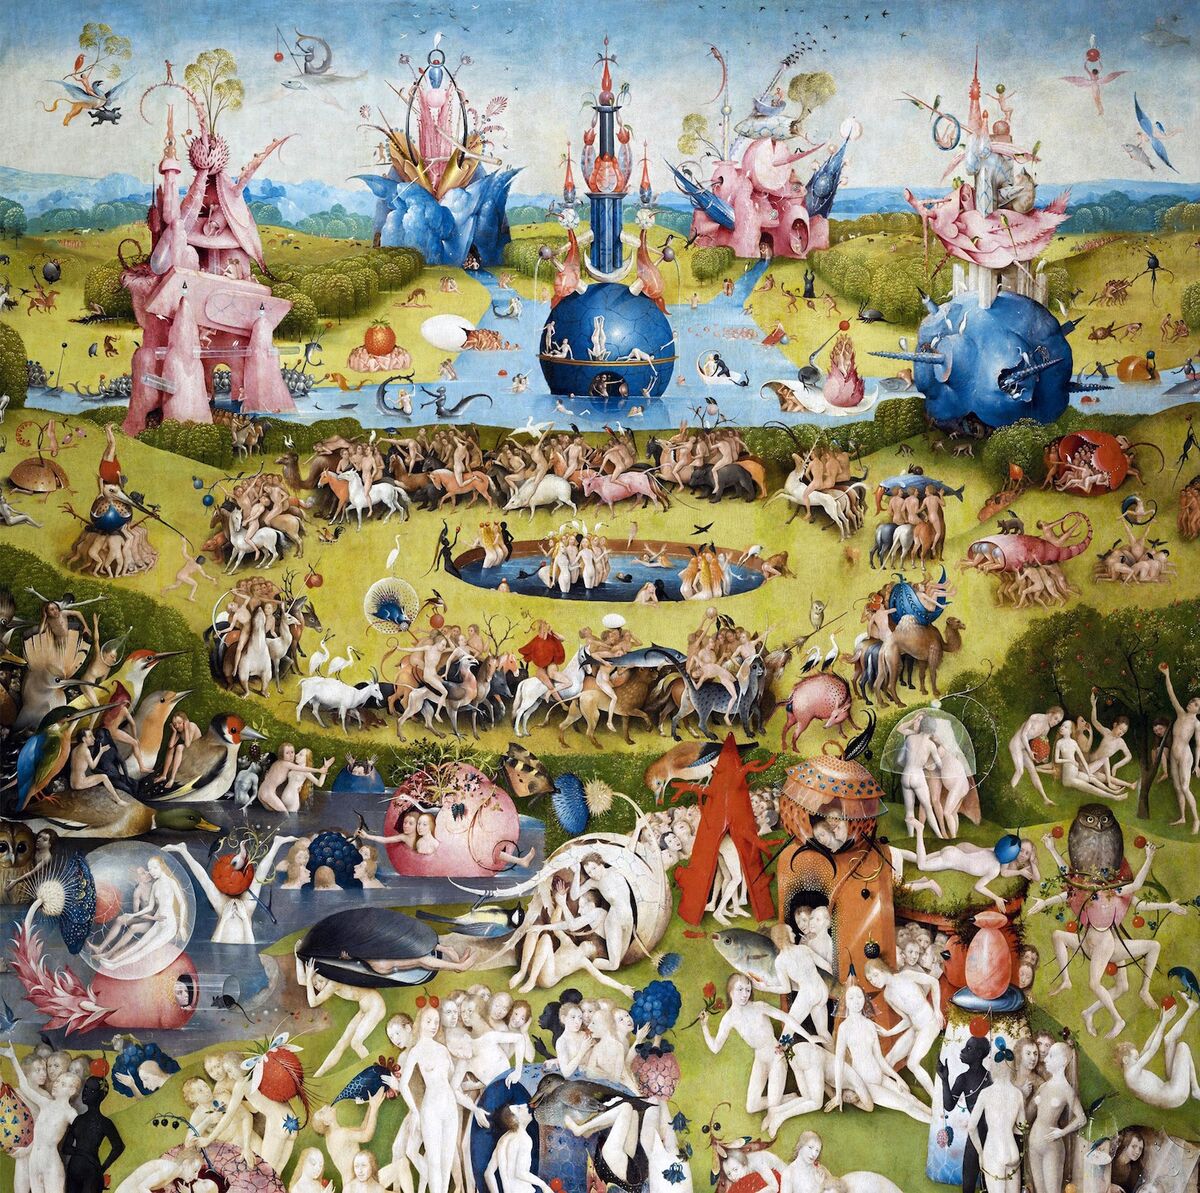 Jheronimus Bosch the innovator of the middle ages